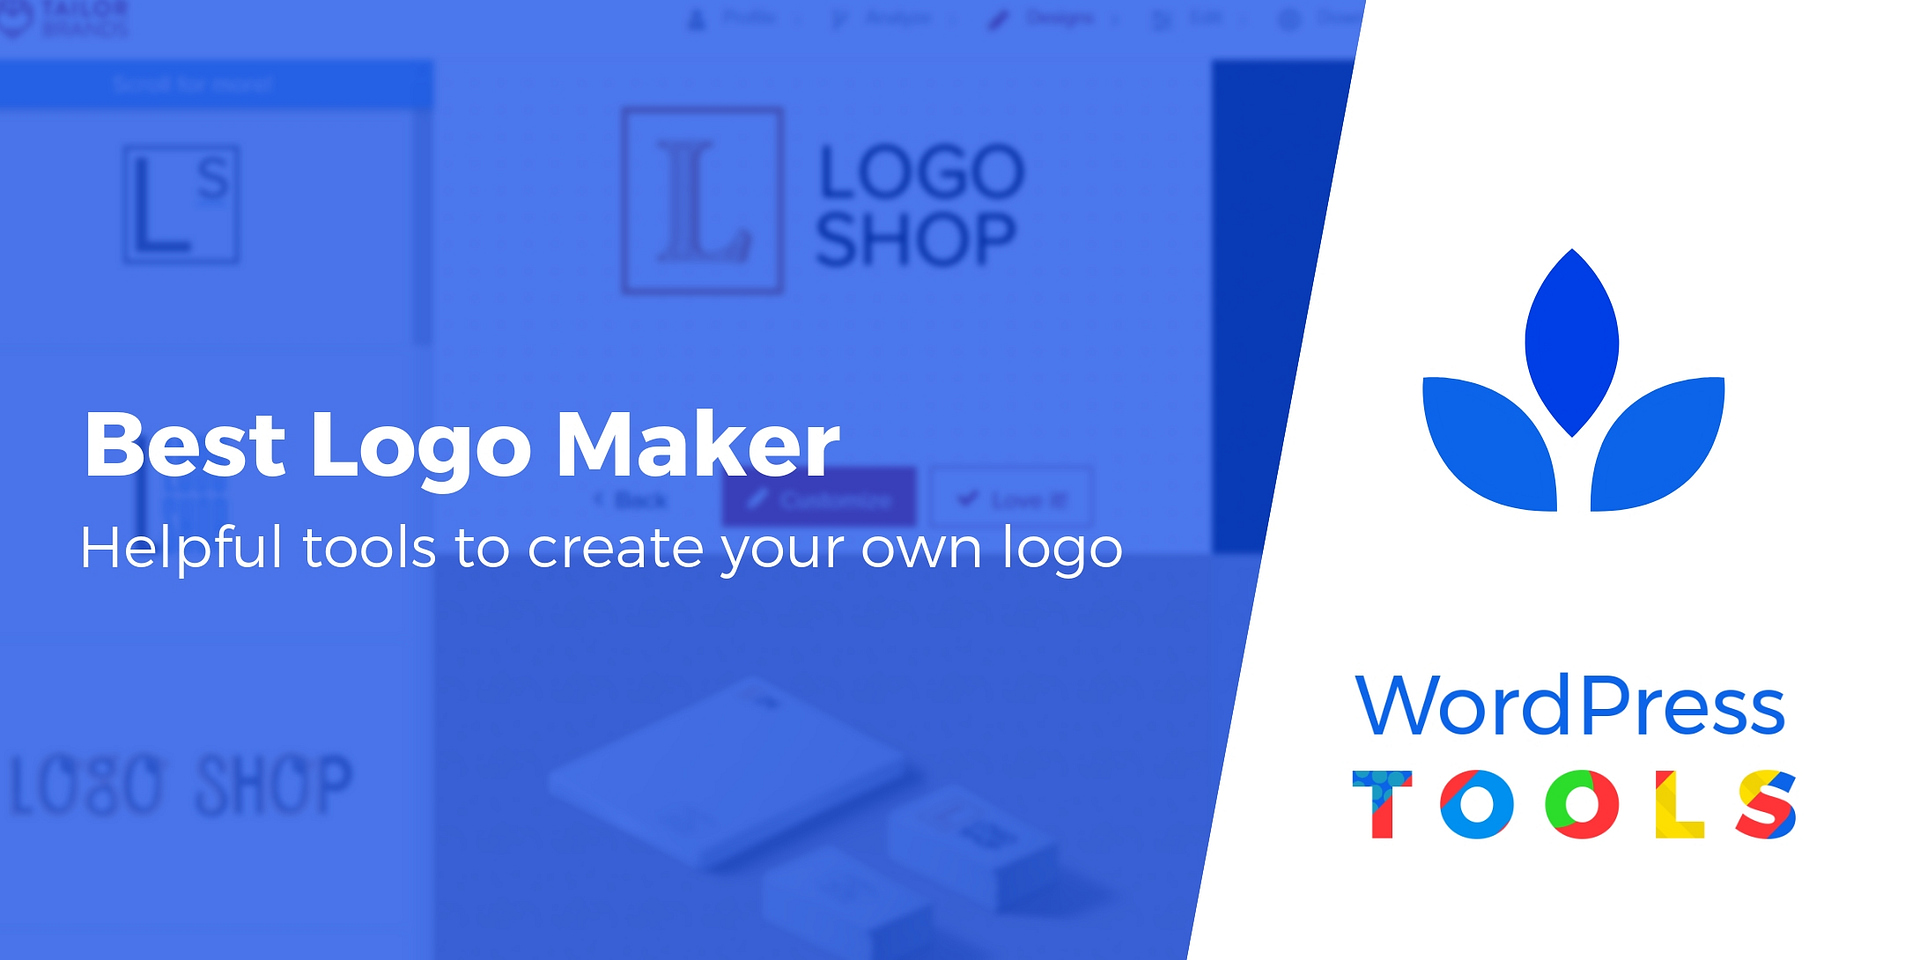 Best Logo Maker 10 Great Tools Compared For 2020 - logo maker for roblox games